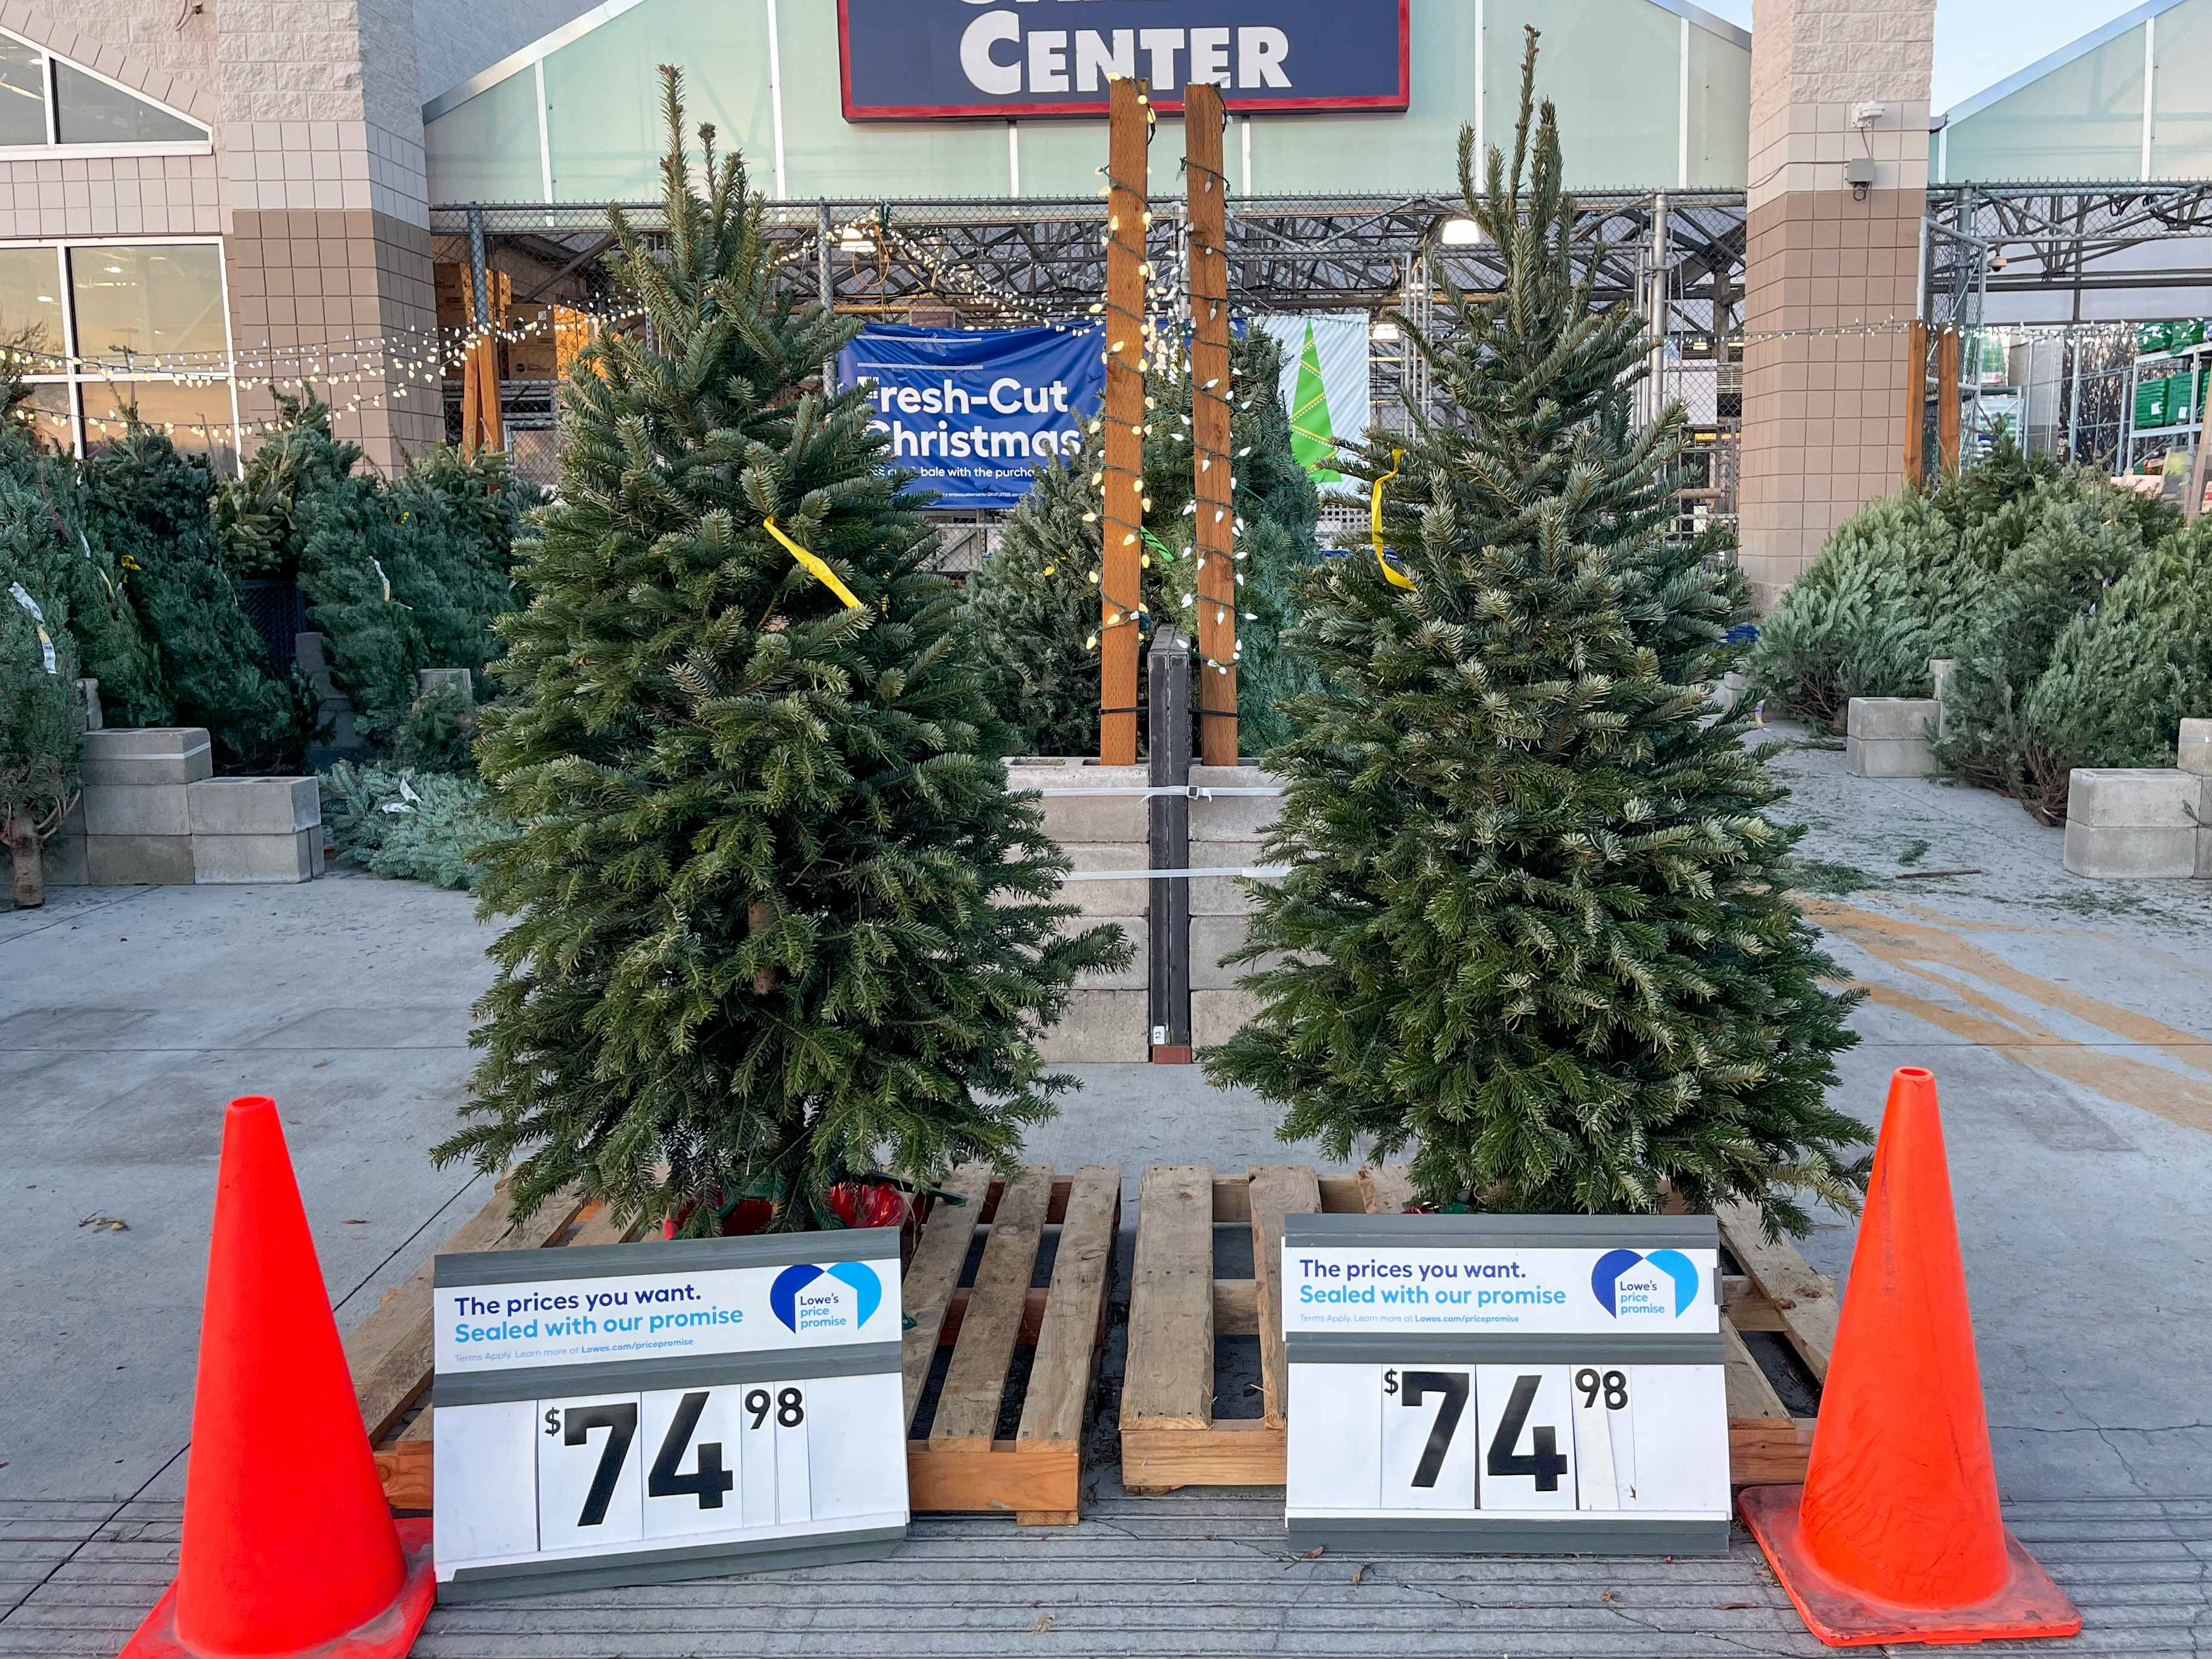 Fresh Cut Christmas trees in front of Lowes